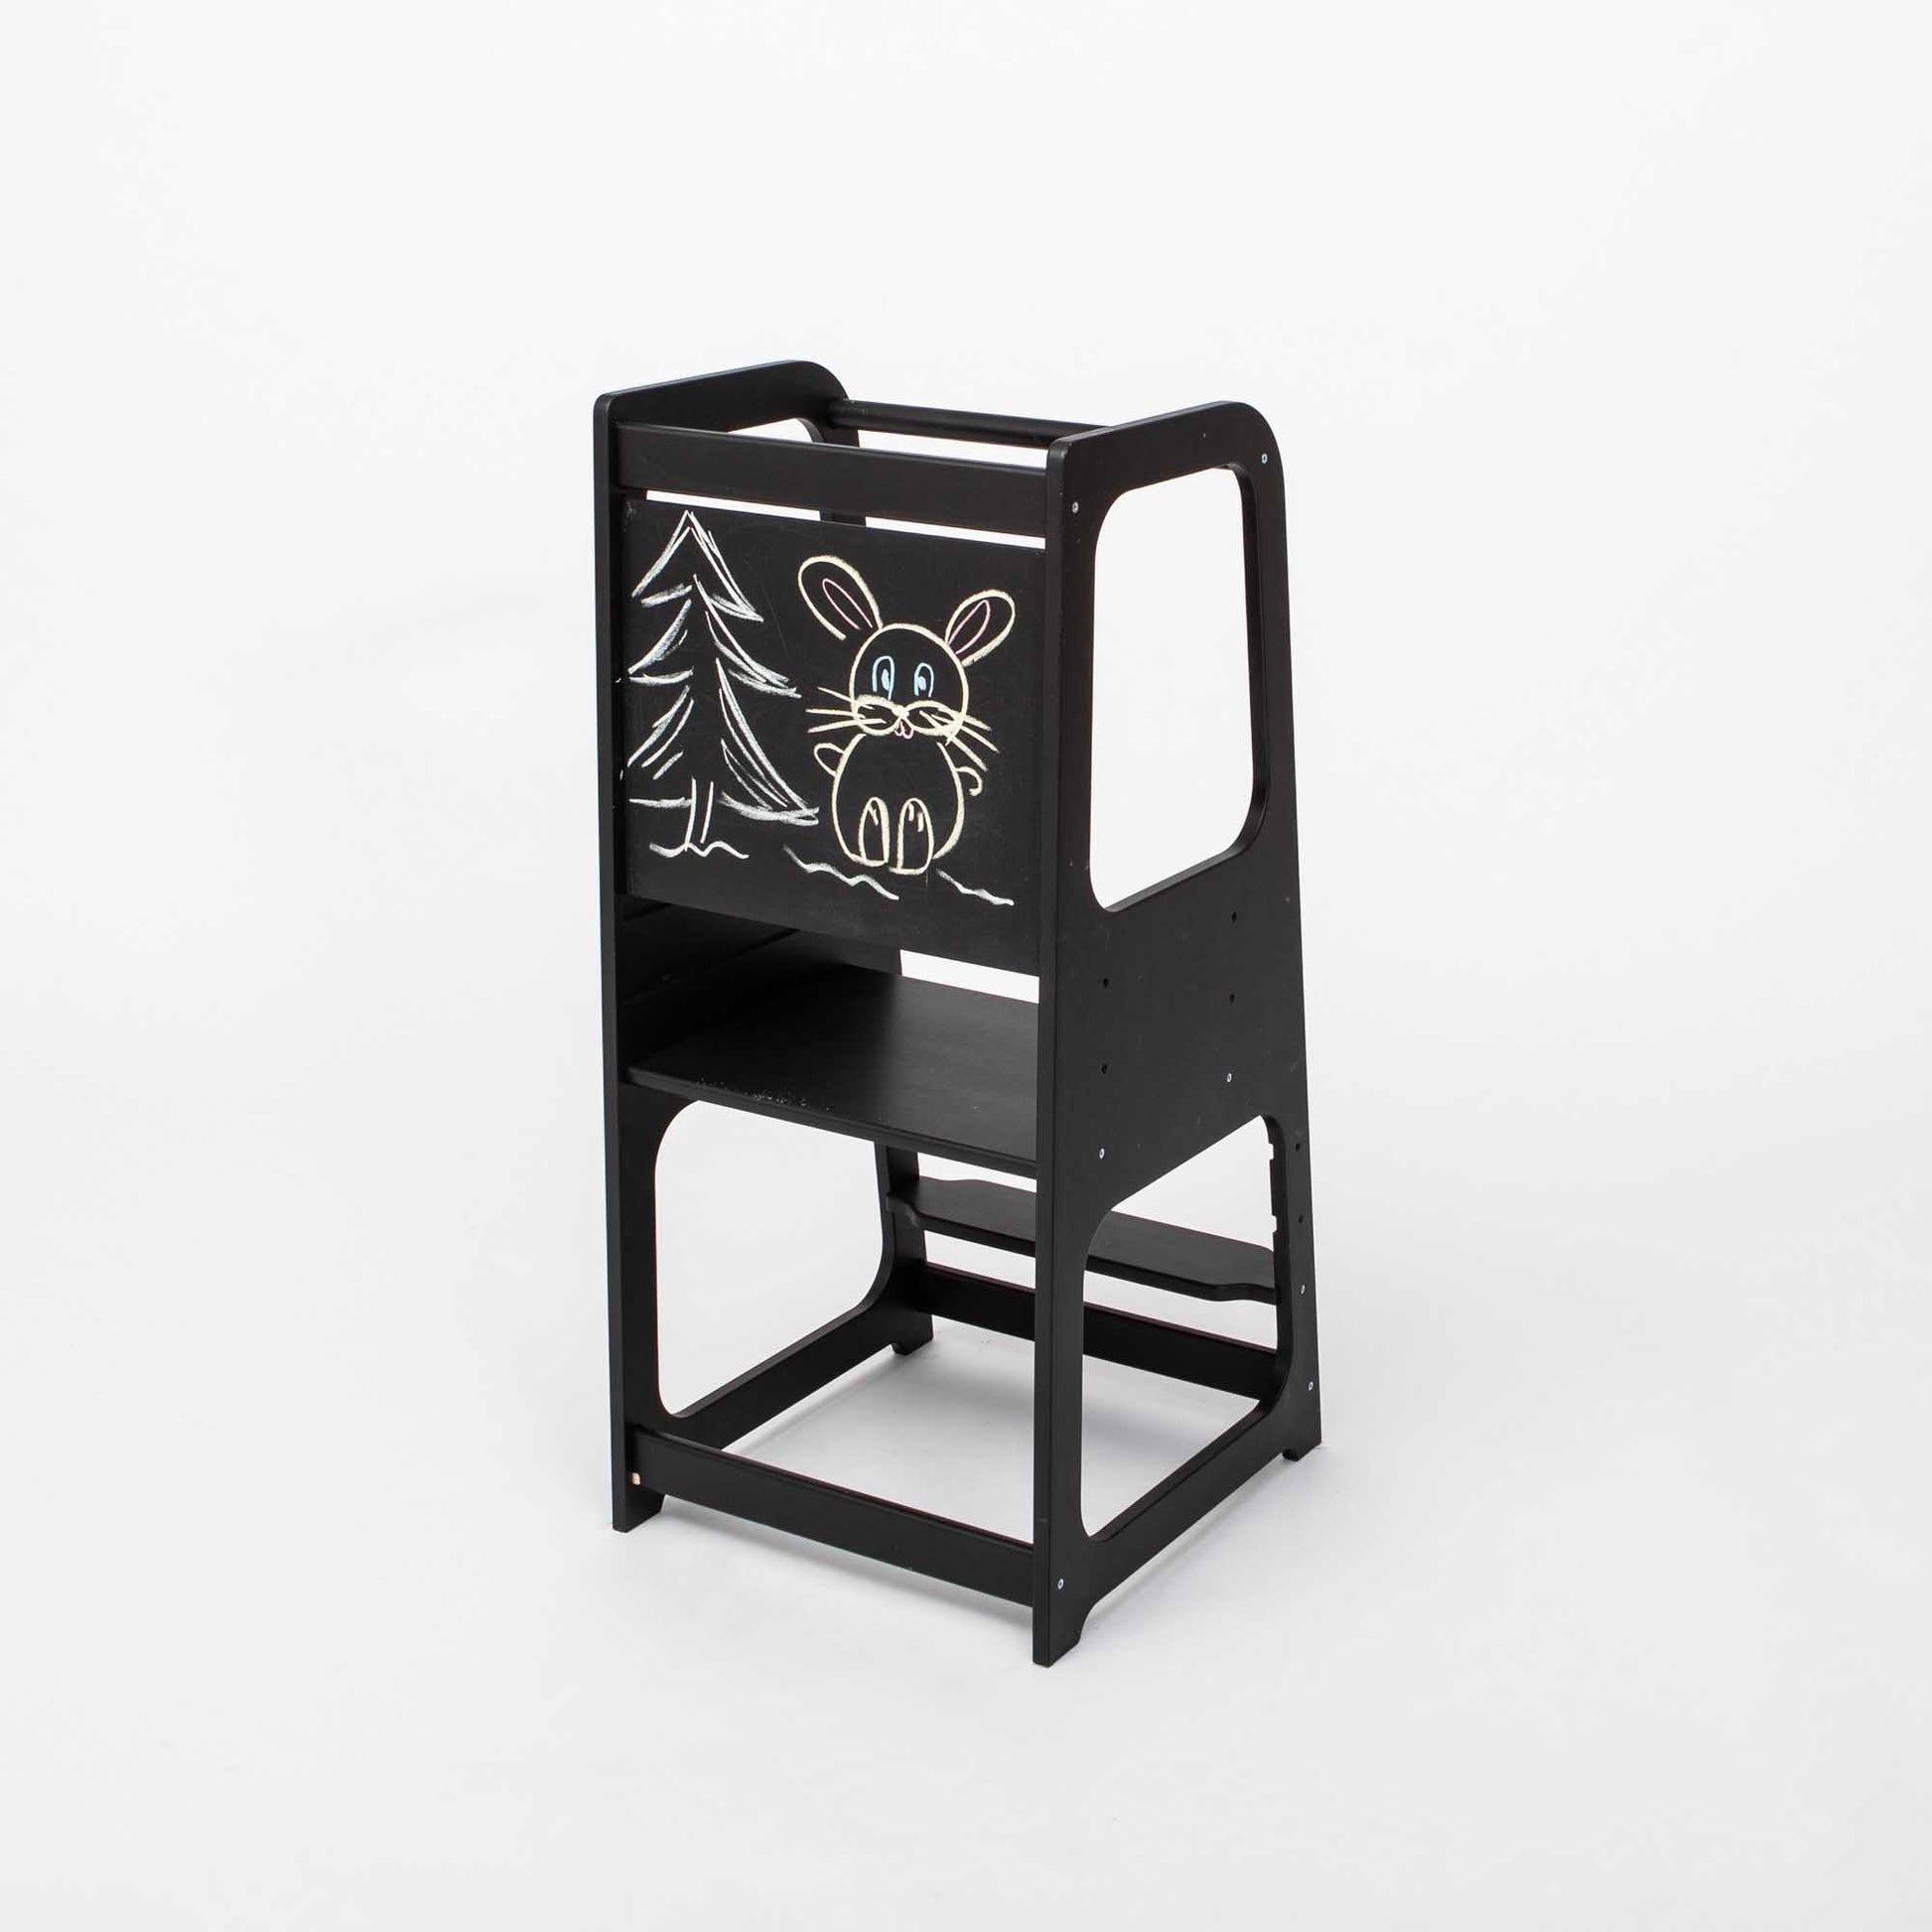 Black kids step stool featuring a chalkboard, set against a clean white background. A versatile and playful addition to any child's space.